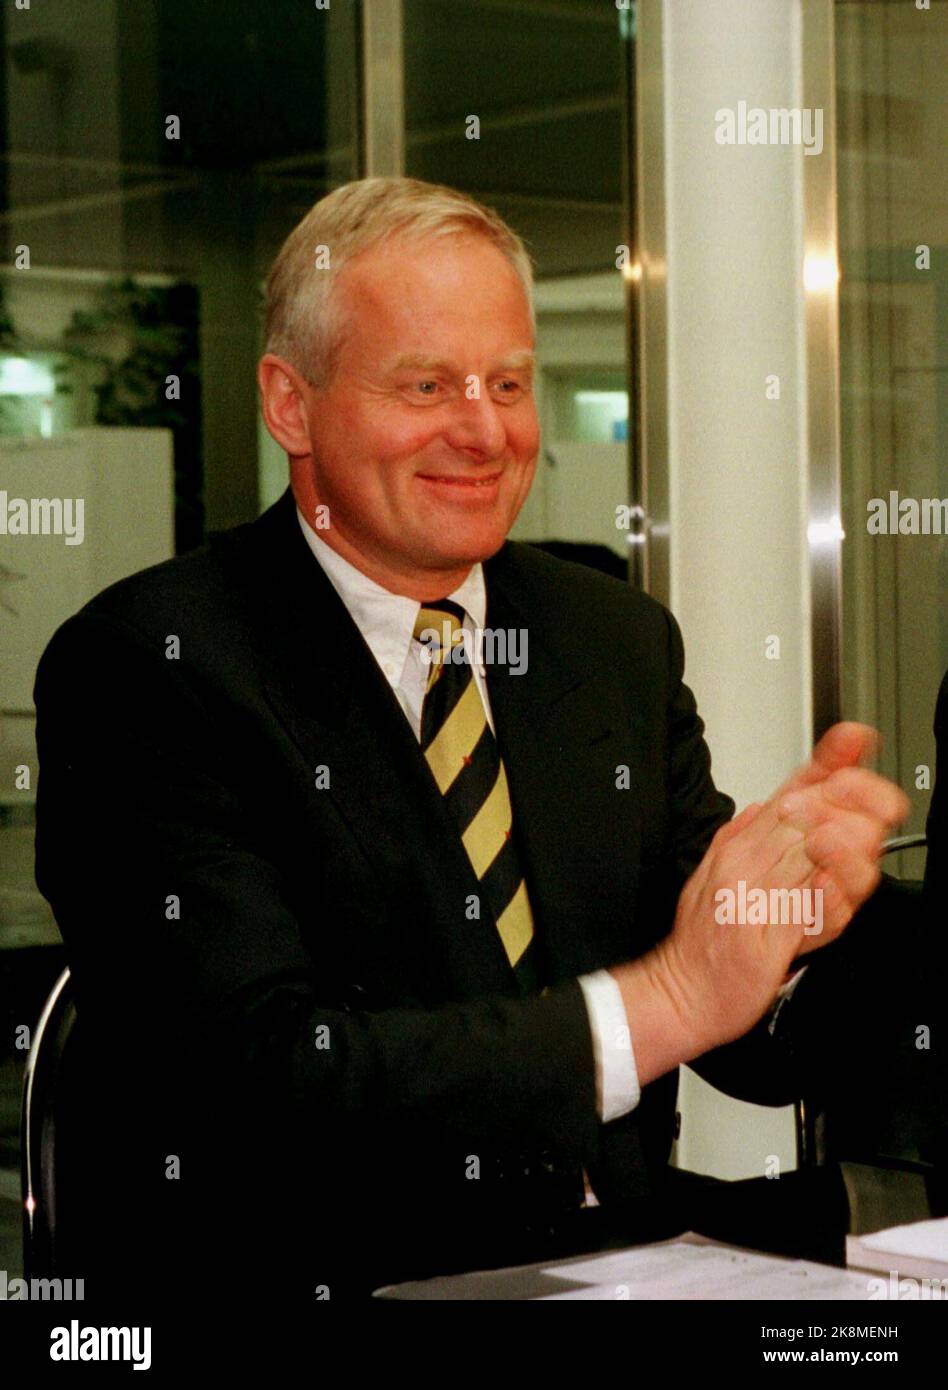 Oslo 19970626. Plans for a merger between the bank Kreditkassen and the insurance company Storebrand. A clearly satisfied CEO of Kreditkassen, Tom Ruud, after there was an overwhelming majority for the merger proposal at the Credit Box's general meeting. Photo: Berit Roald / NTB Stock Photo